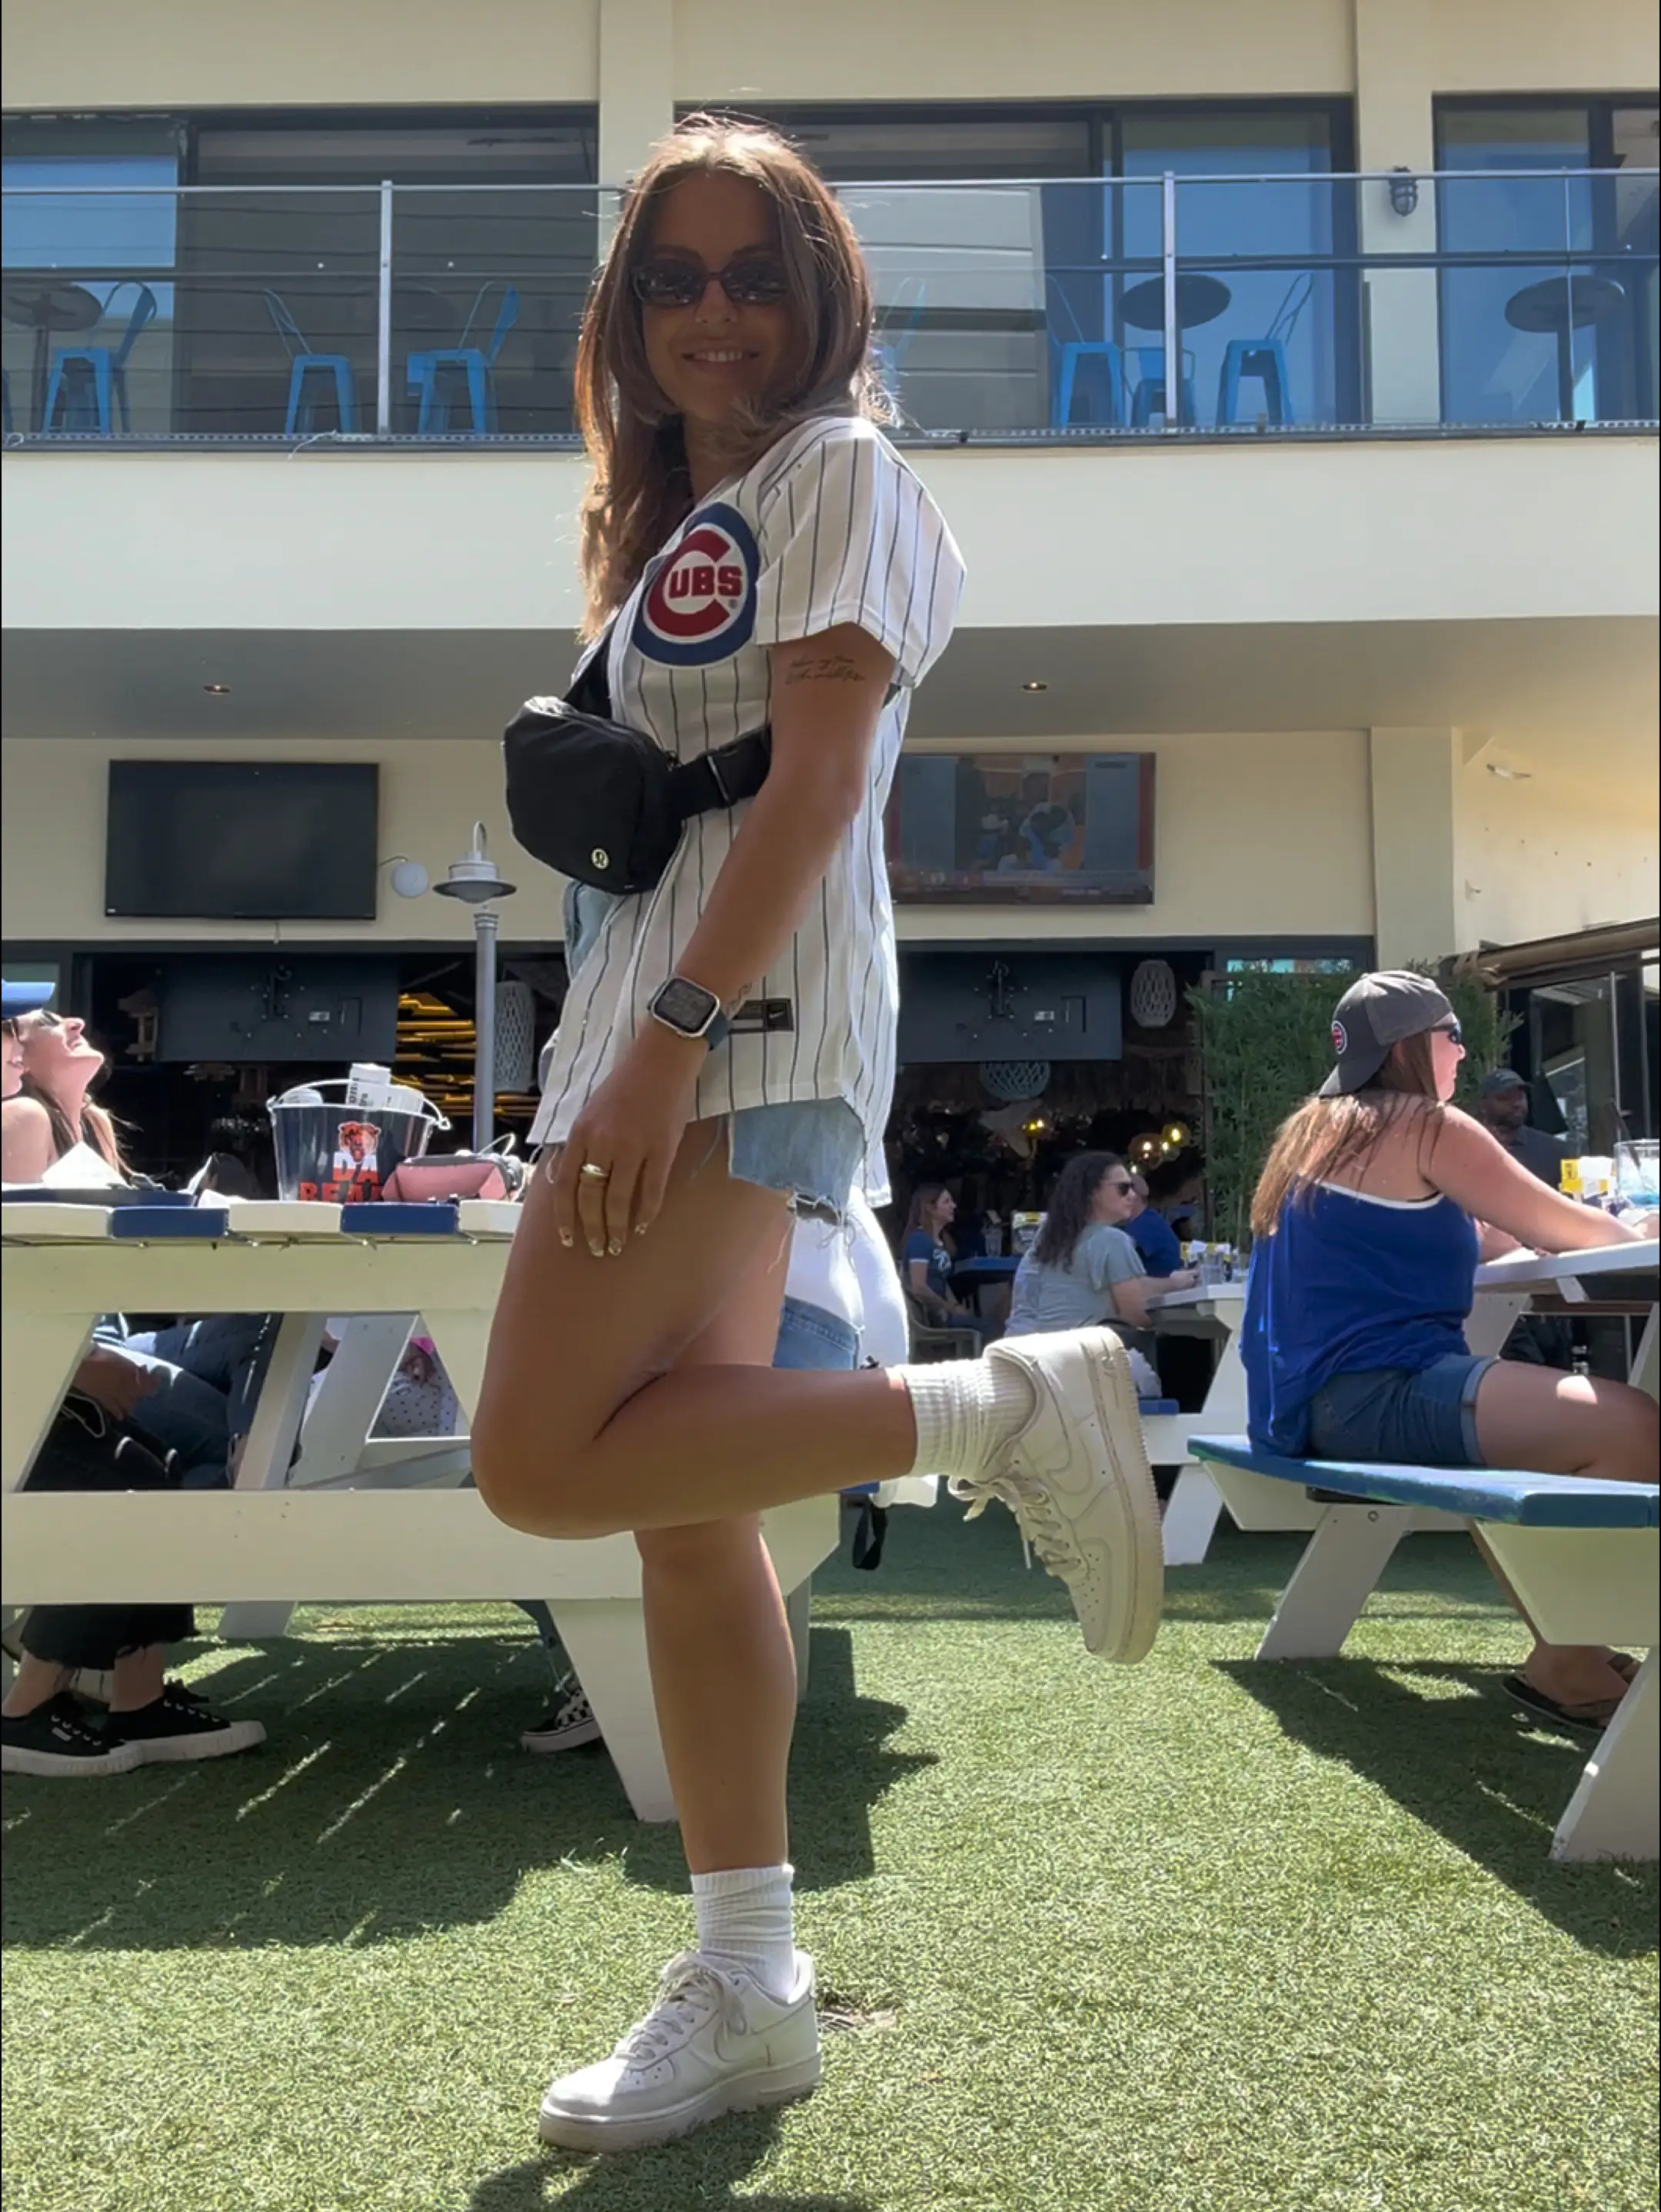 WHAT I WORE TO THE CUBS GAME  Video published by Sydney Austin